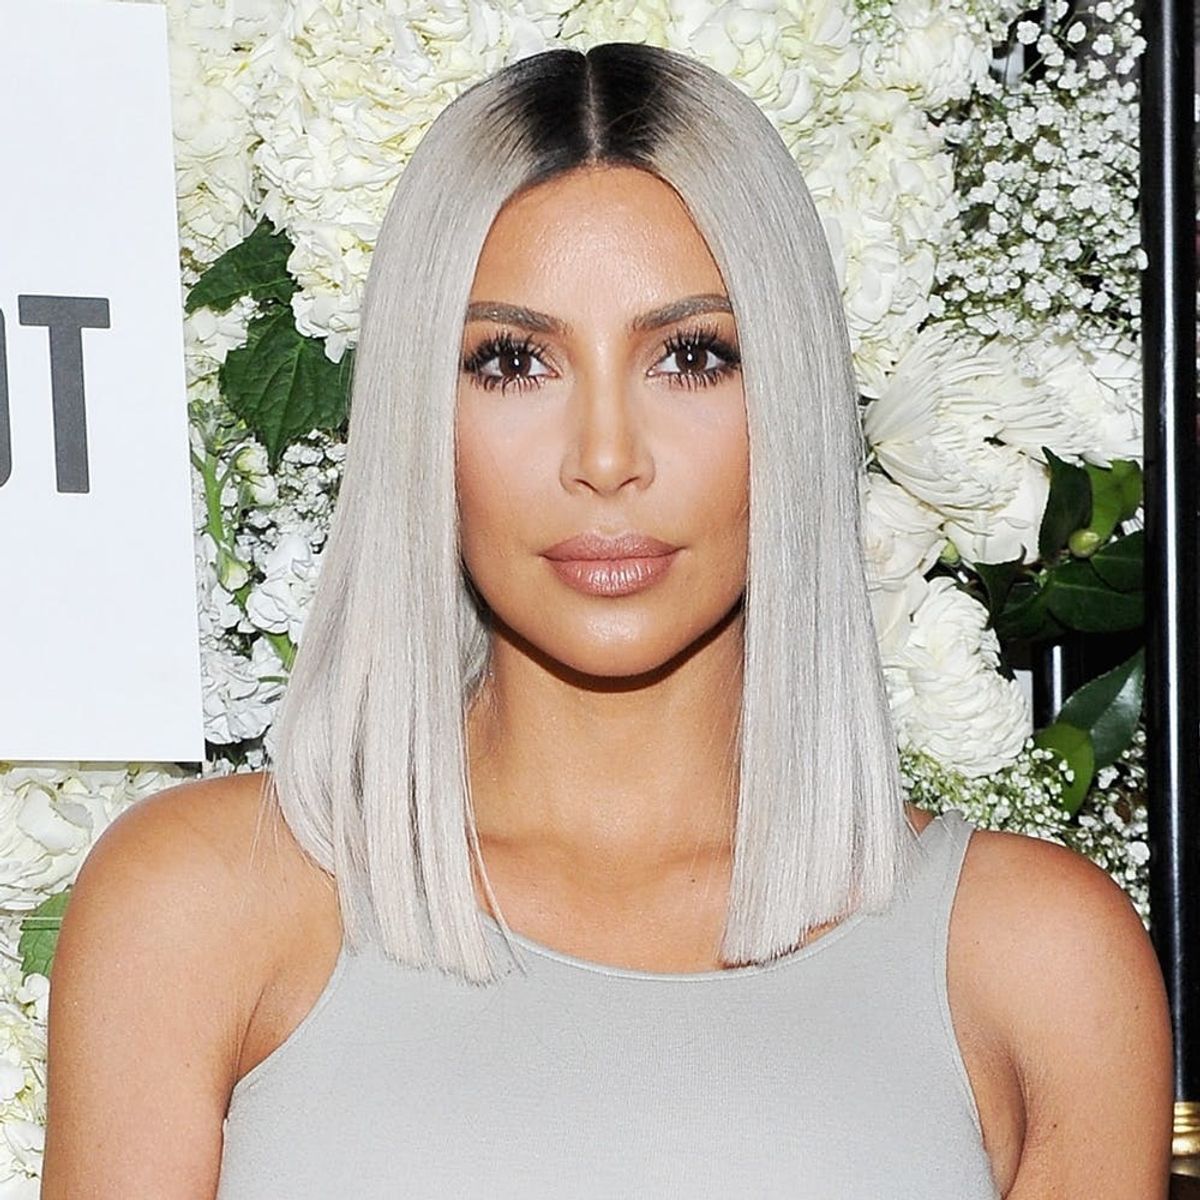 Fans Think Kim Kardashian West’s Cryptic Instagram Post Might Be a Baby Name Clue